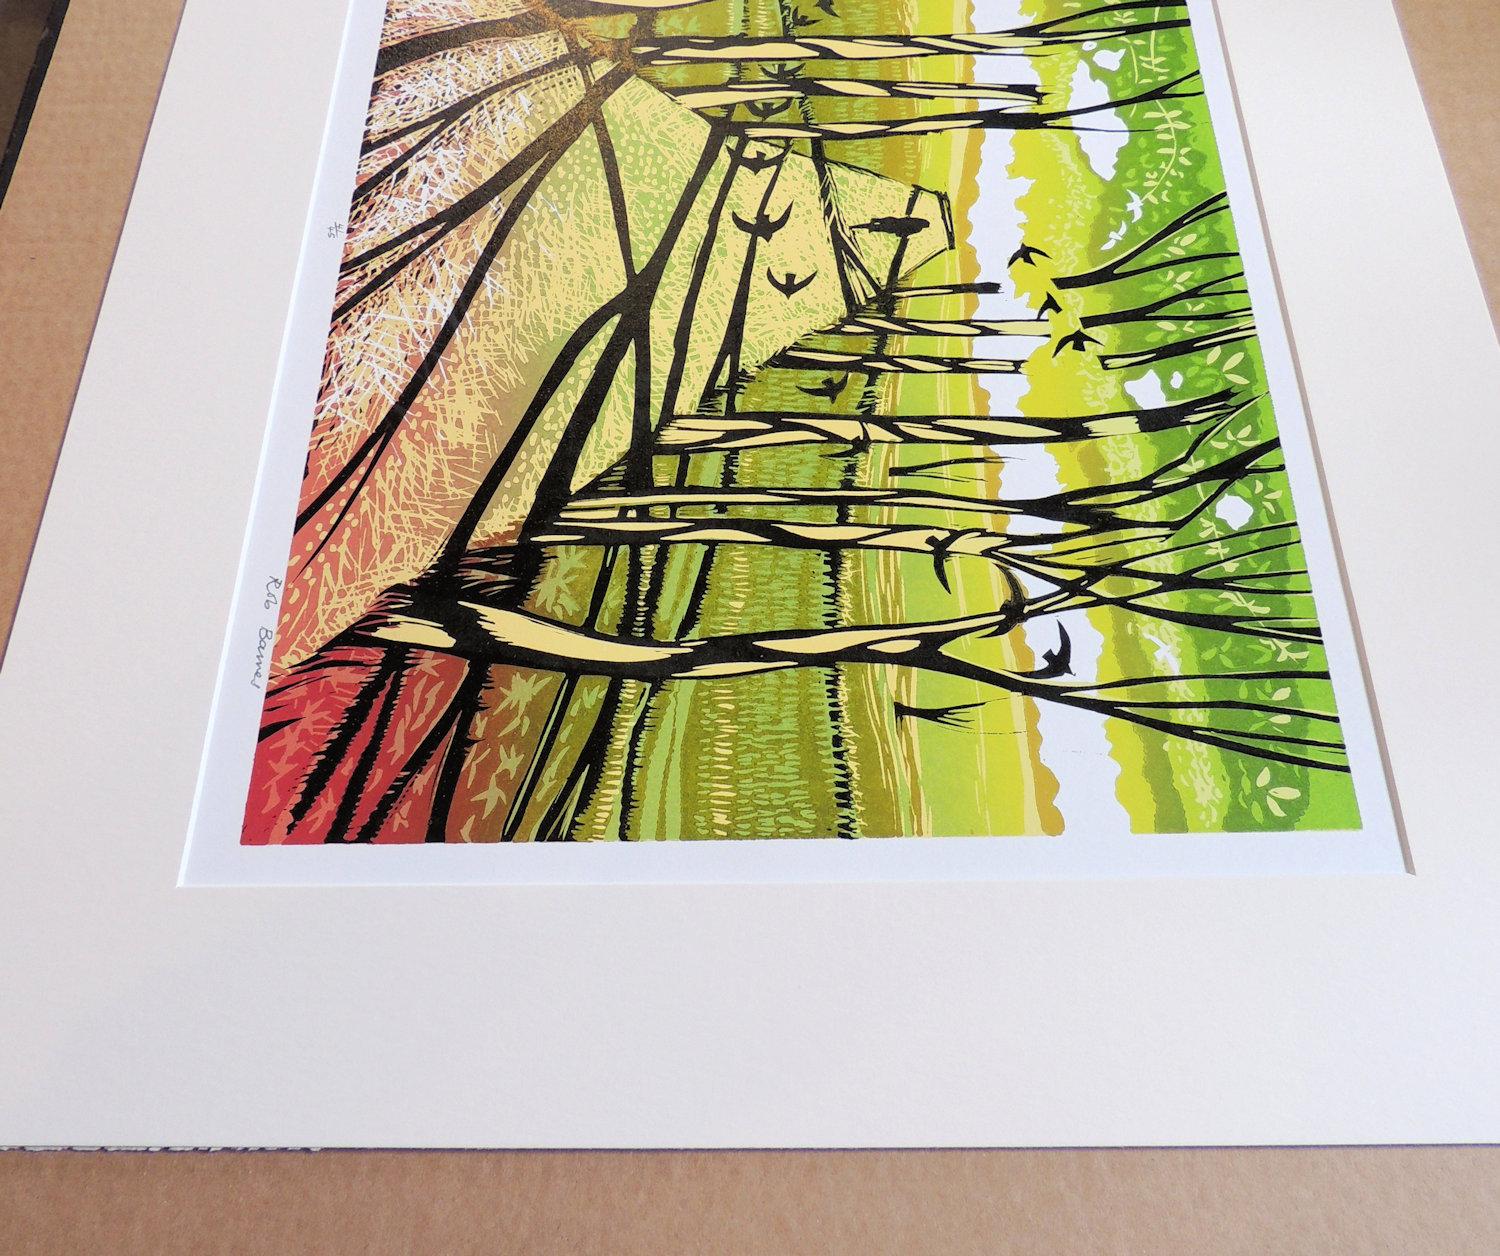 Rob Barnes
Tree Shadows
Limited Edition Linocut Print
Edition of 50
Image Size H 44cm x W 33cm
Sheet Size H 49cm x W 61cm
Sold Unframed mounted in Antique White mountboard
Free Shipping
Please note that in situ images are purely an indication of how